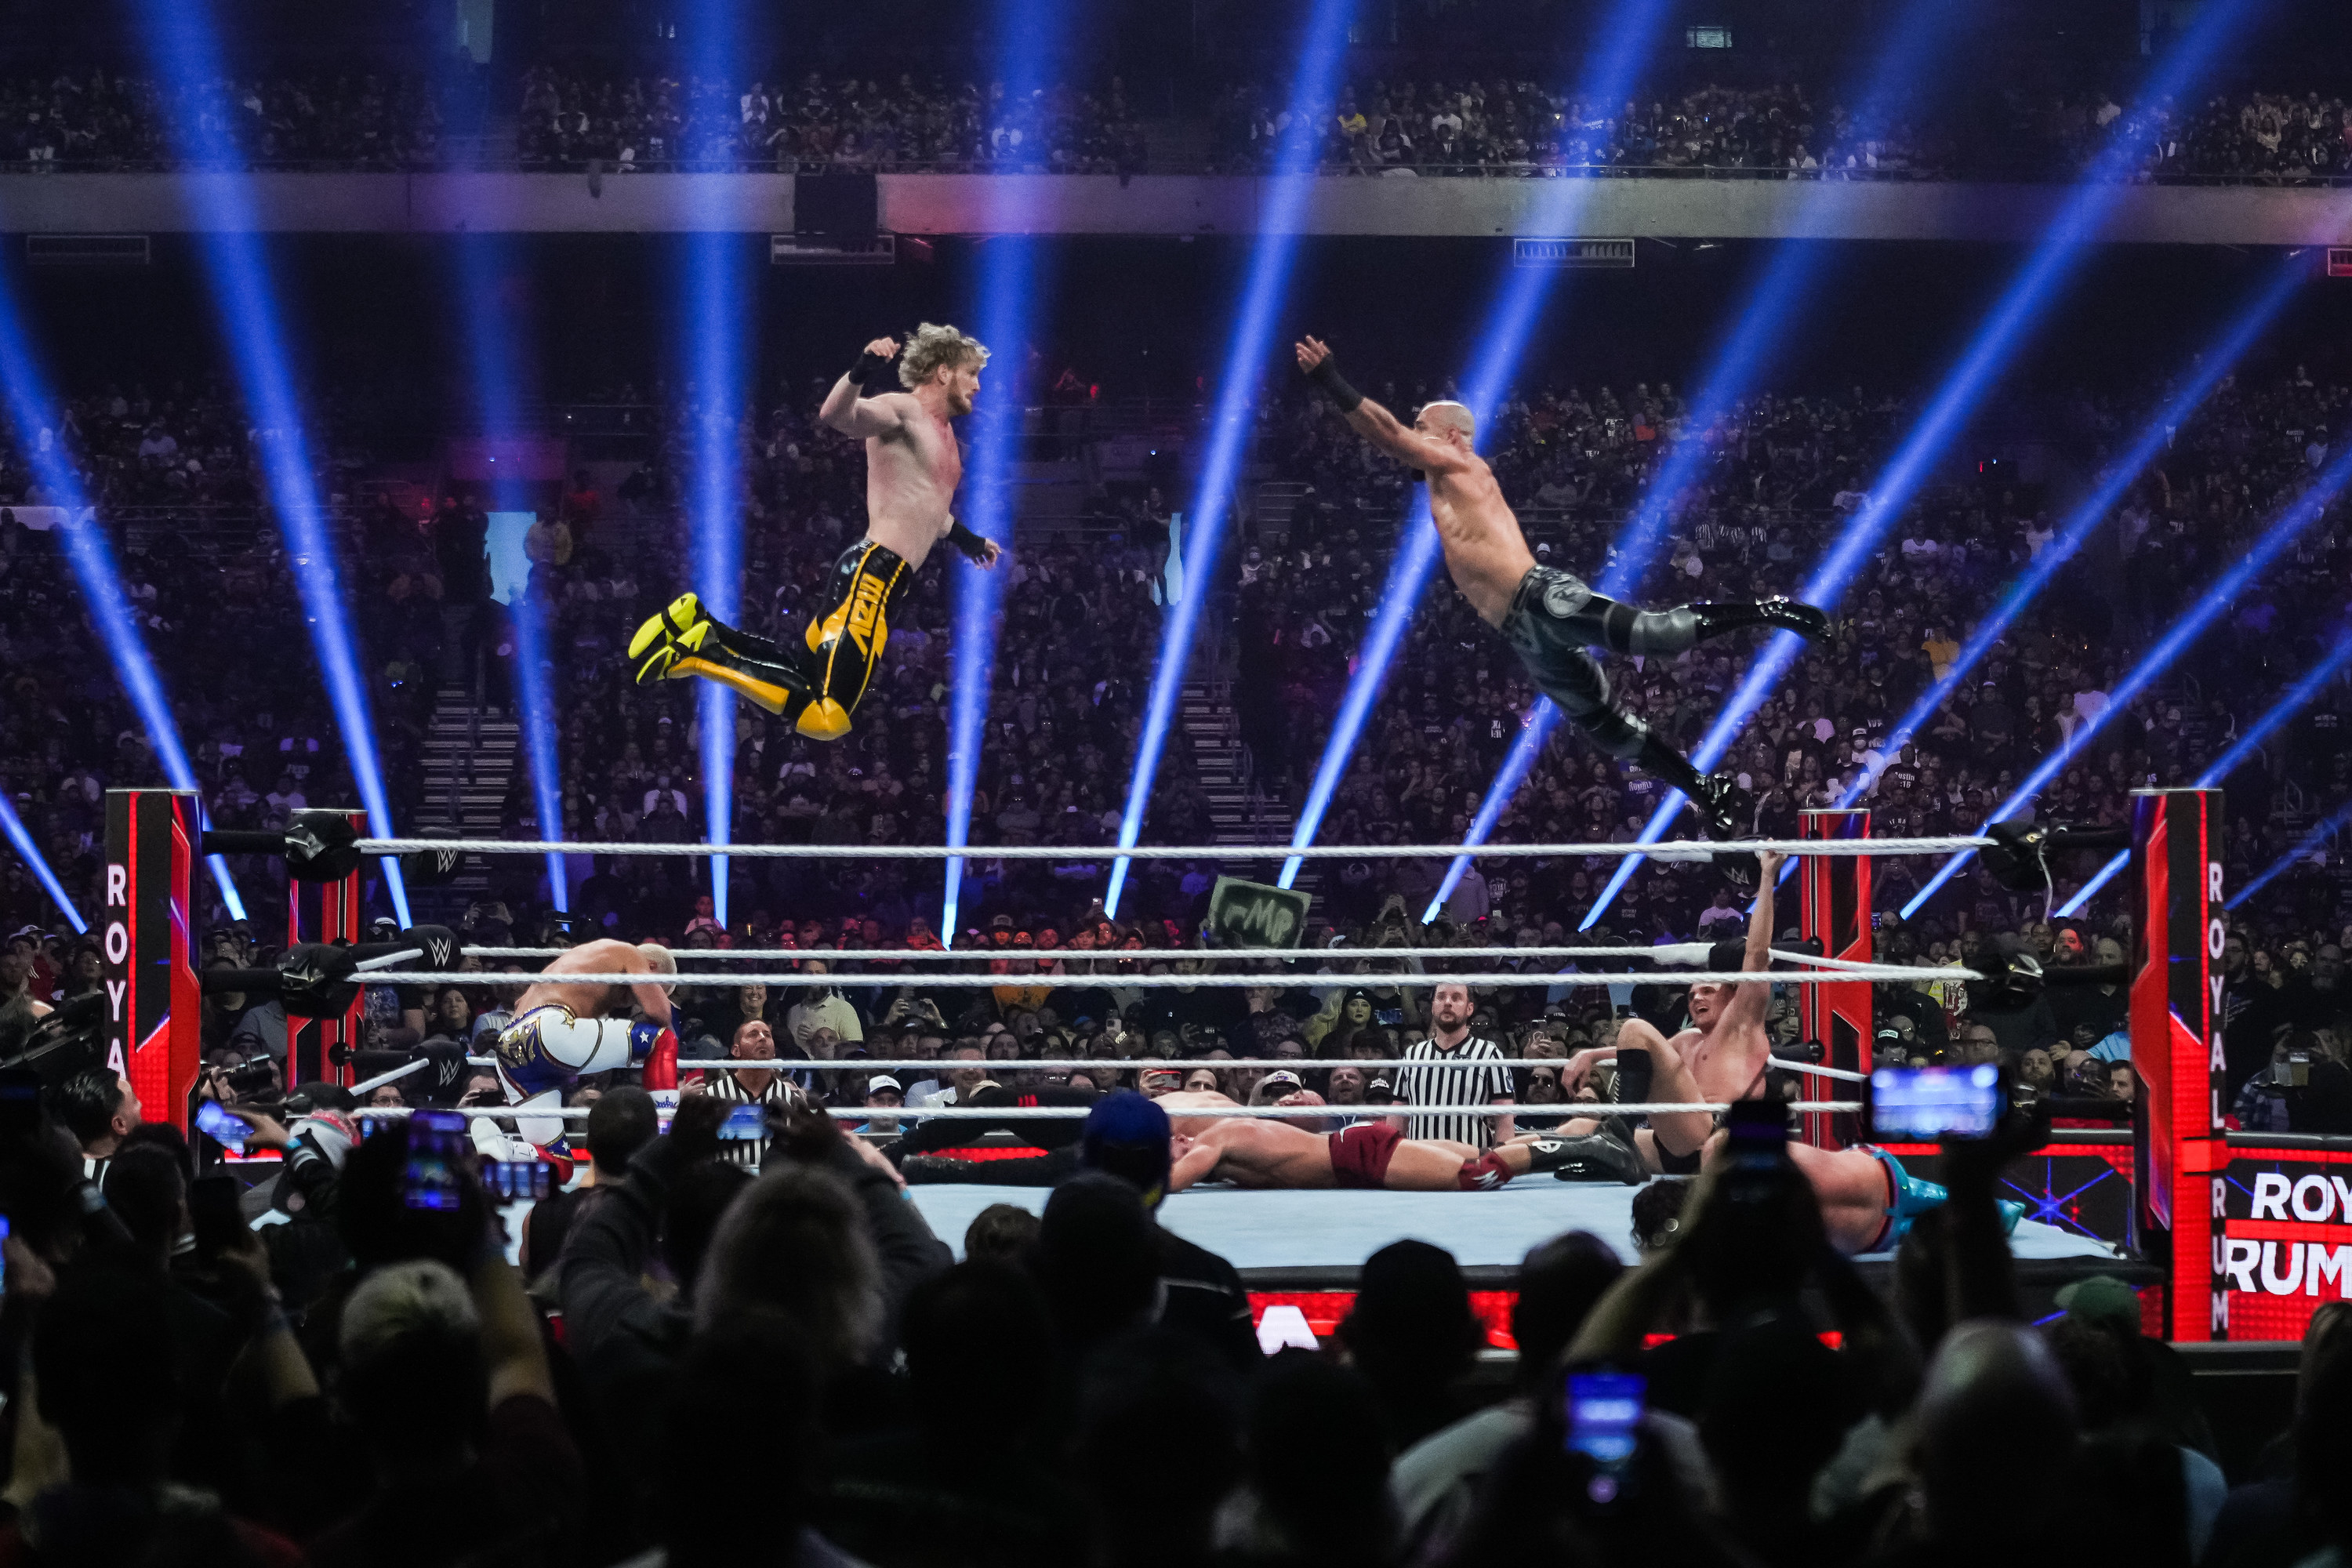 Logan Paul and Ricochet wrestle during the WWE Royal Rumble at the Alamodome on January 28, 2023 in San Antonio, Texas.